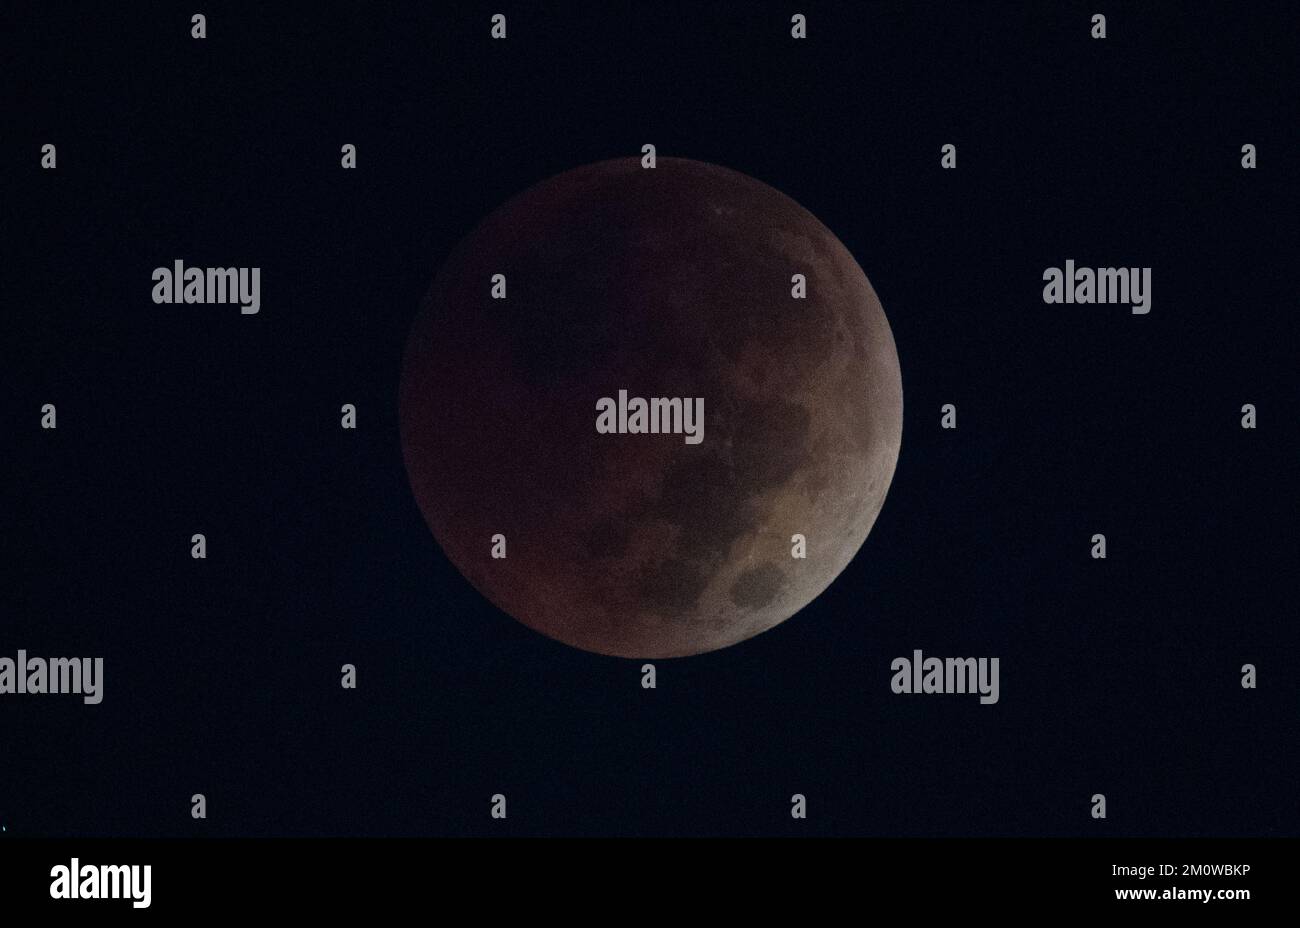 FLORIDA, USA - 08 November 2022 - The Moon is seen during a total lunar eclipse on Tuesday, November 8, 2022, at NASA’s Kennedy Space Center in Florid Stock Photo